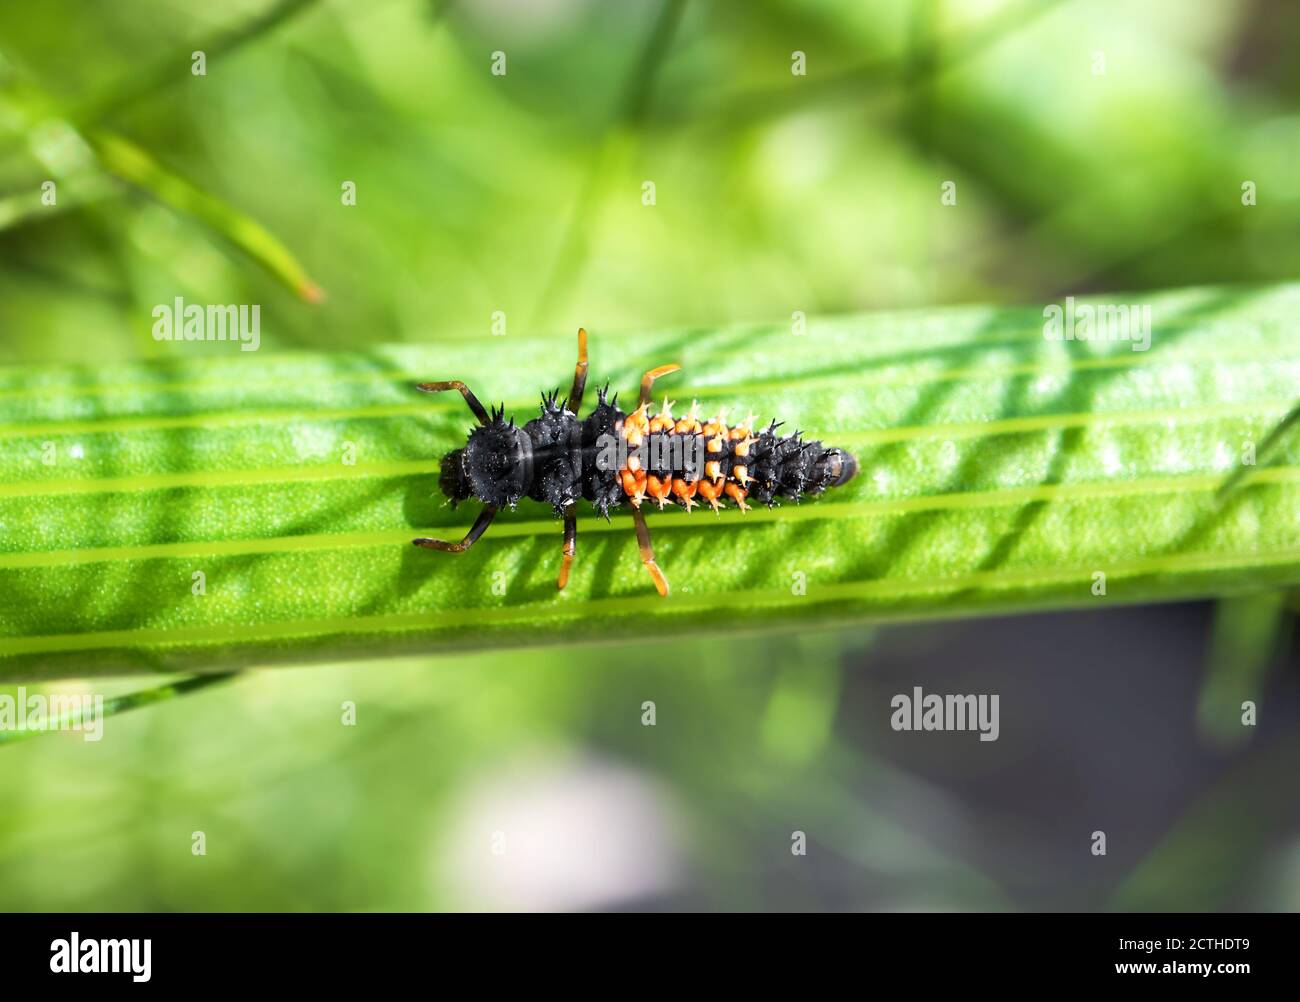 Ladybug larvae or nymph on stem of a fennel plant. This black orange creepy looking bug is extremely beneficial for the garden. Consumes aphids. Stock Photo